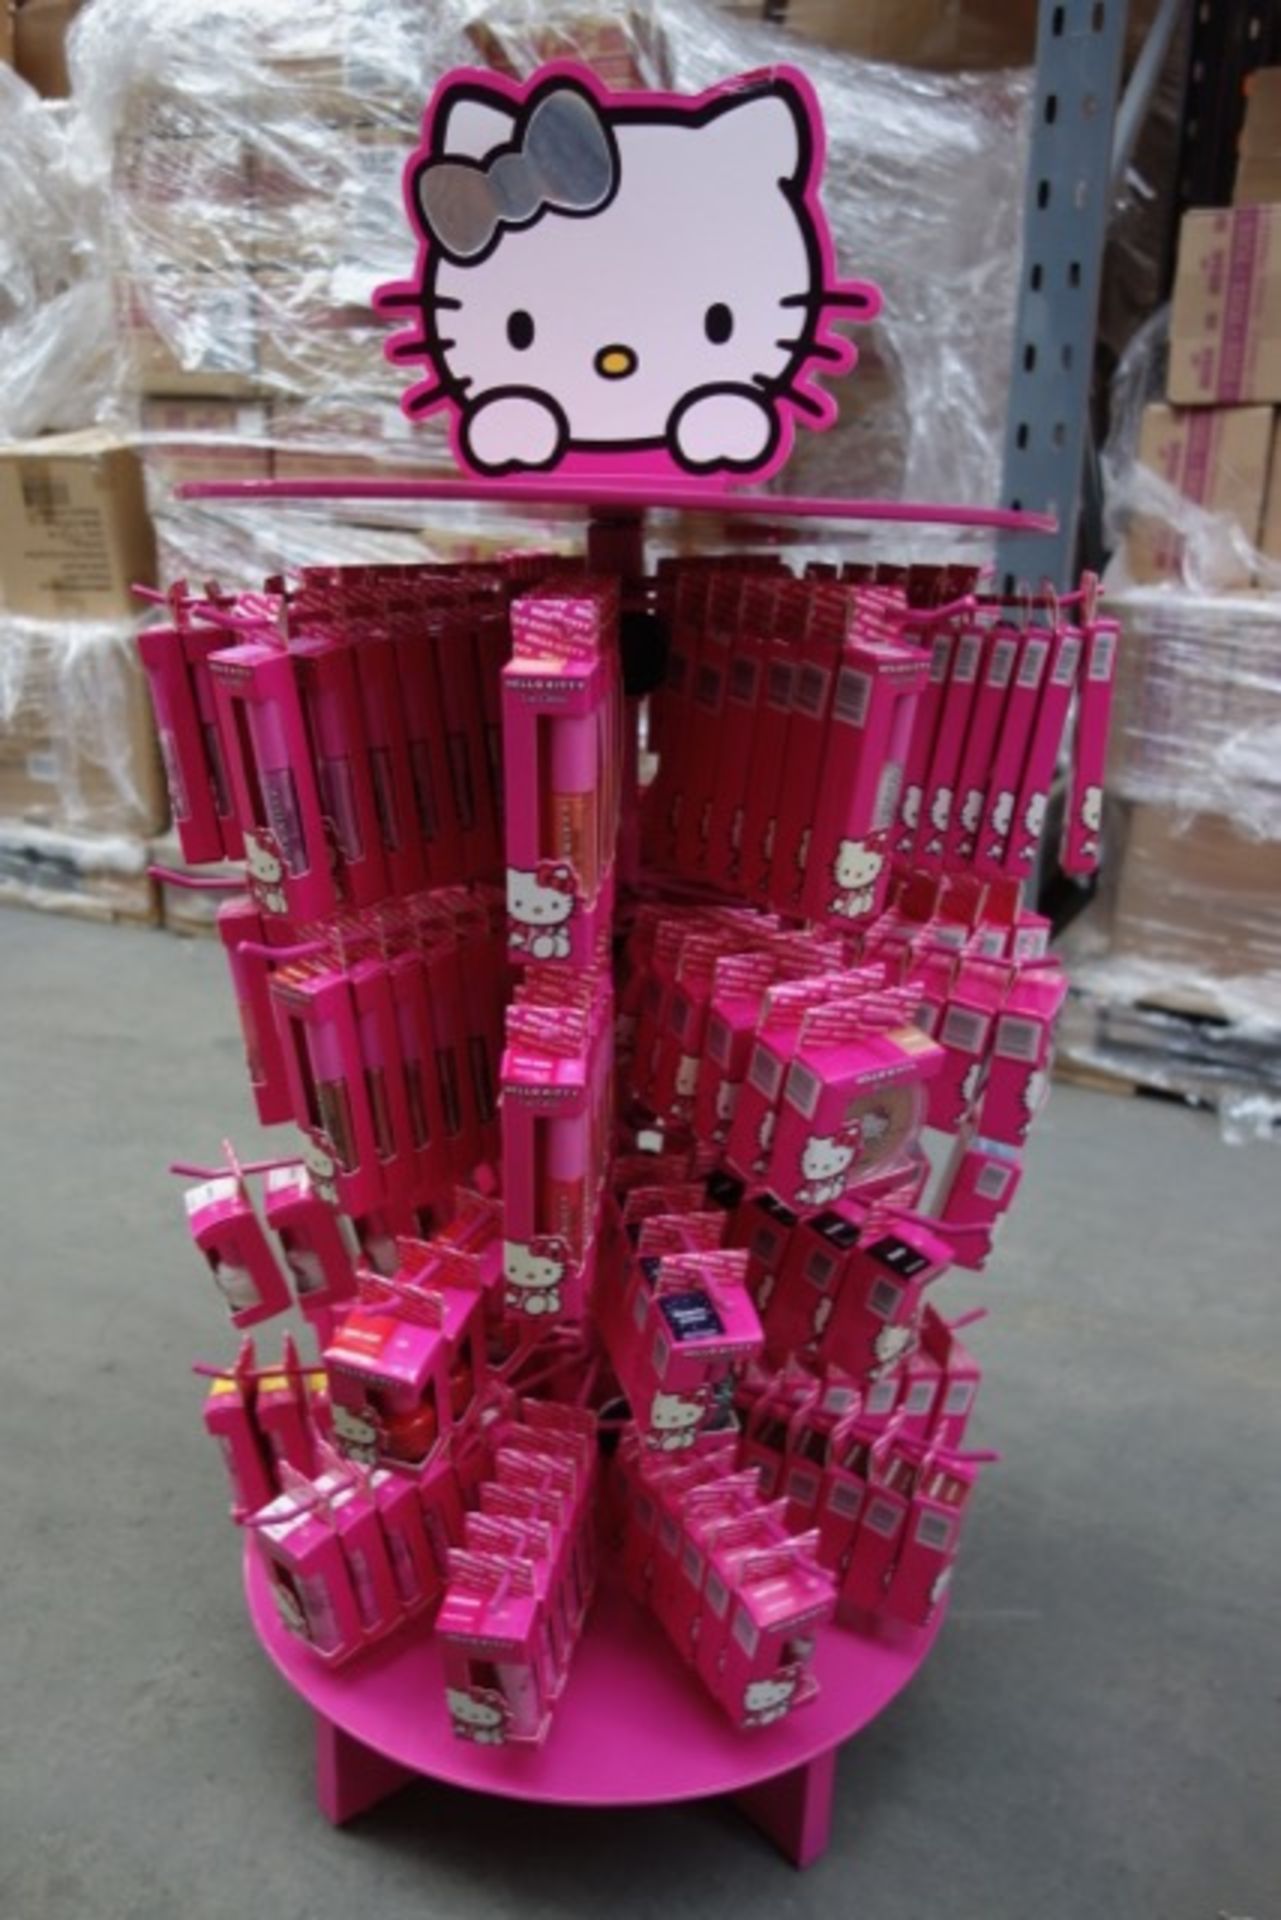 Display Stand Containing Approx. 240 Pieces of Hello Kitty Cosmetics - each with a RRP of £3.50 - Image 2 of 9